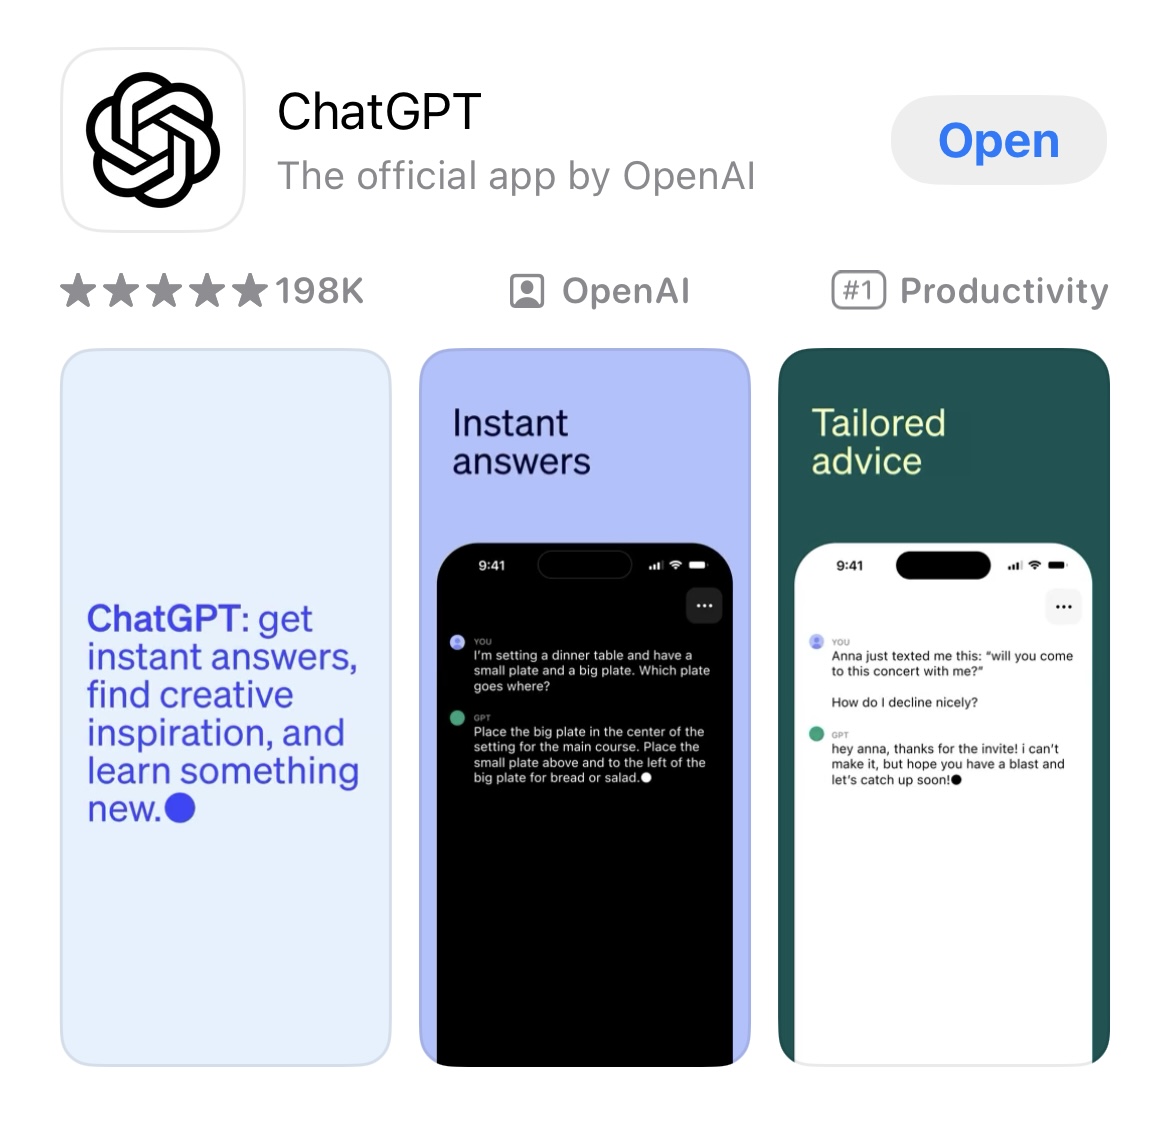 chatgpt in the app store